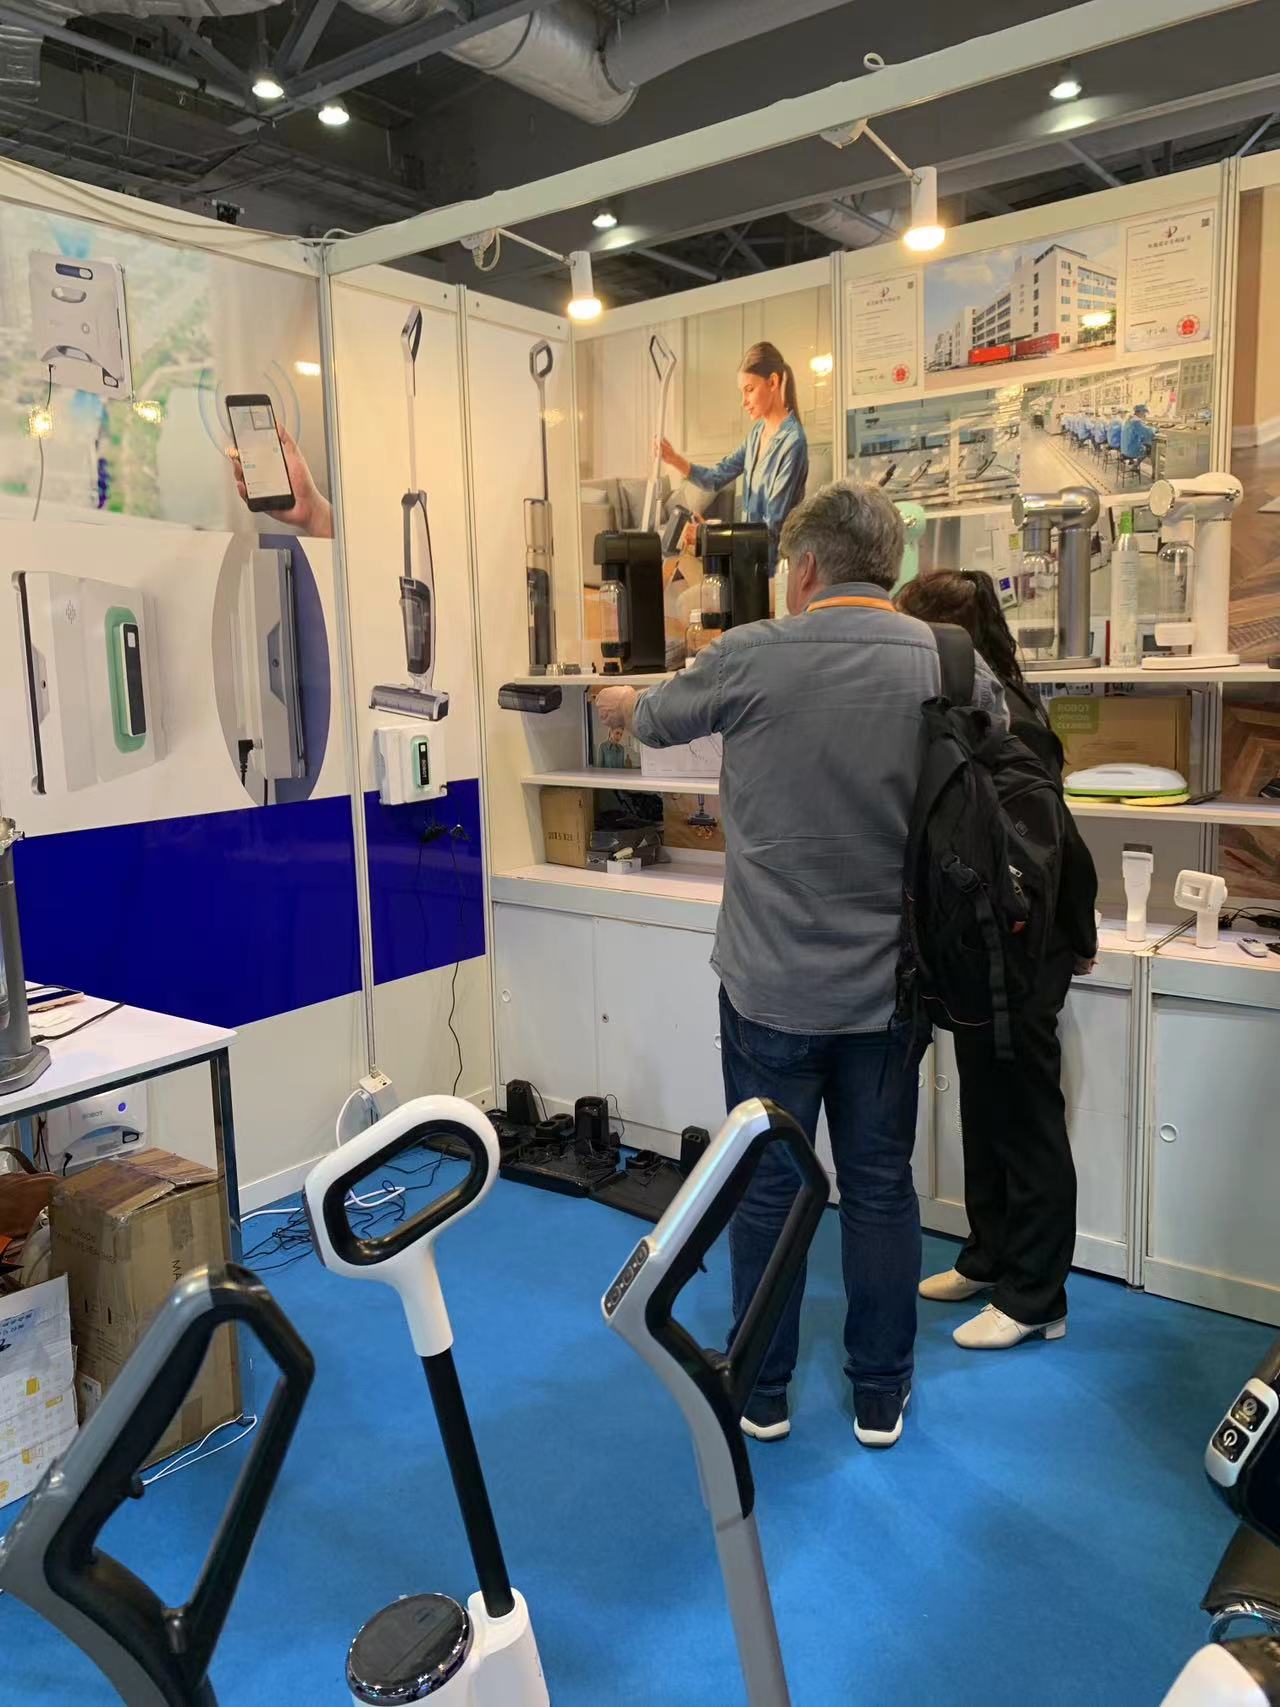 Bengbu MiFan Technology Co., Ltd Invites Visitors to Explore Innovative Cleaning Tools at Global Sources Exhibitions in Hong Kong - Company News - 2